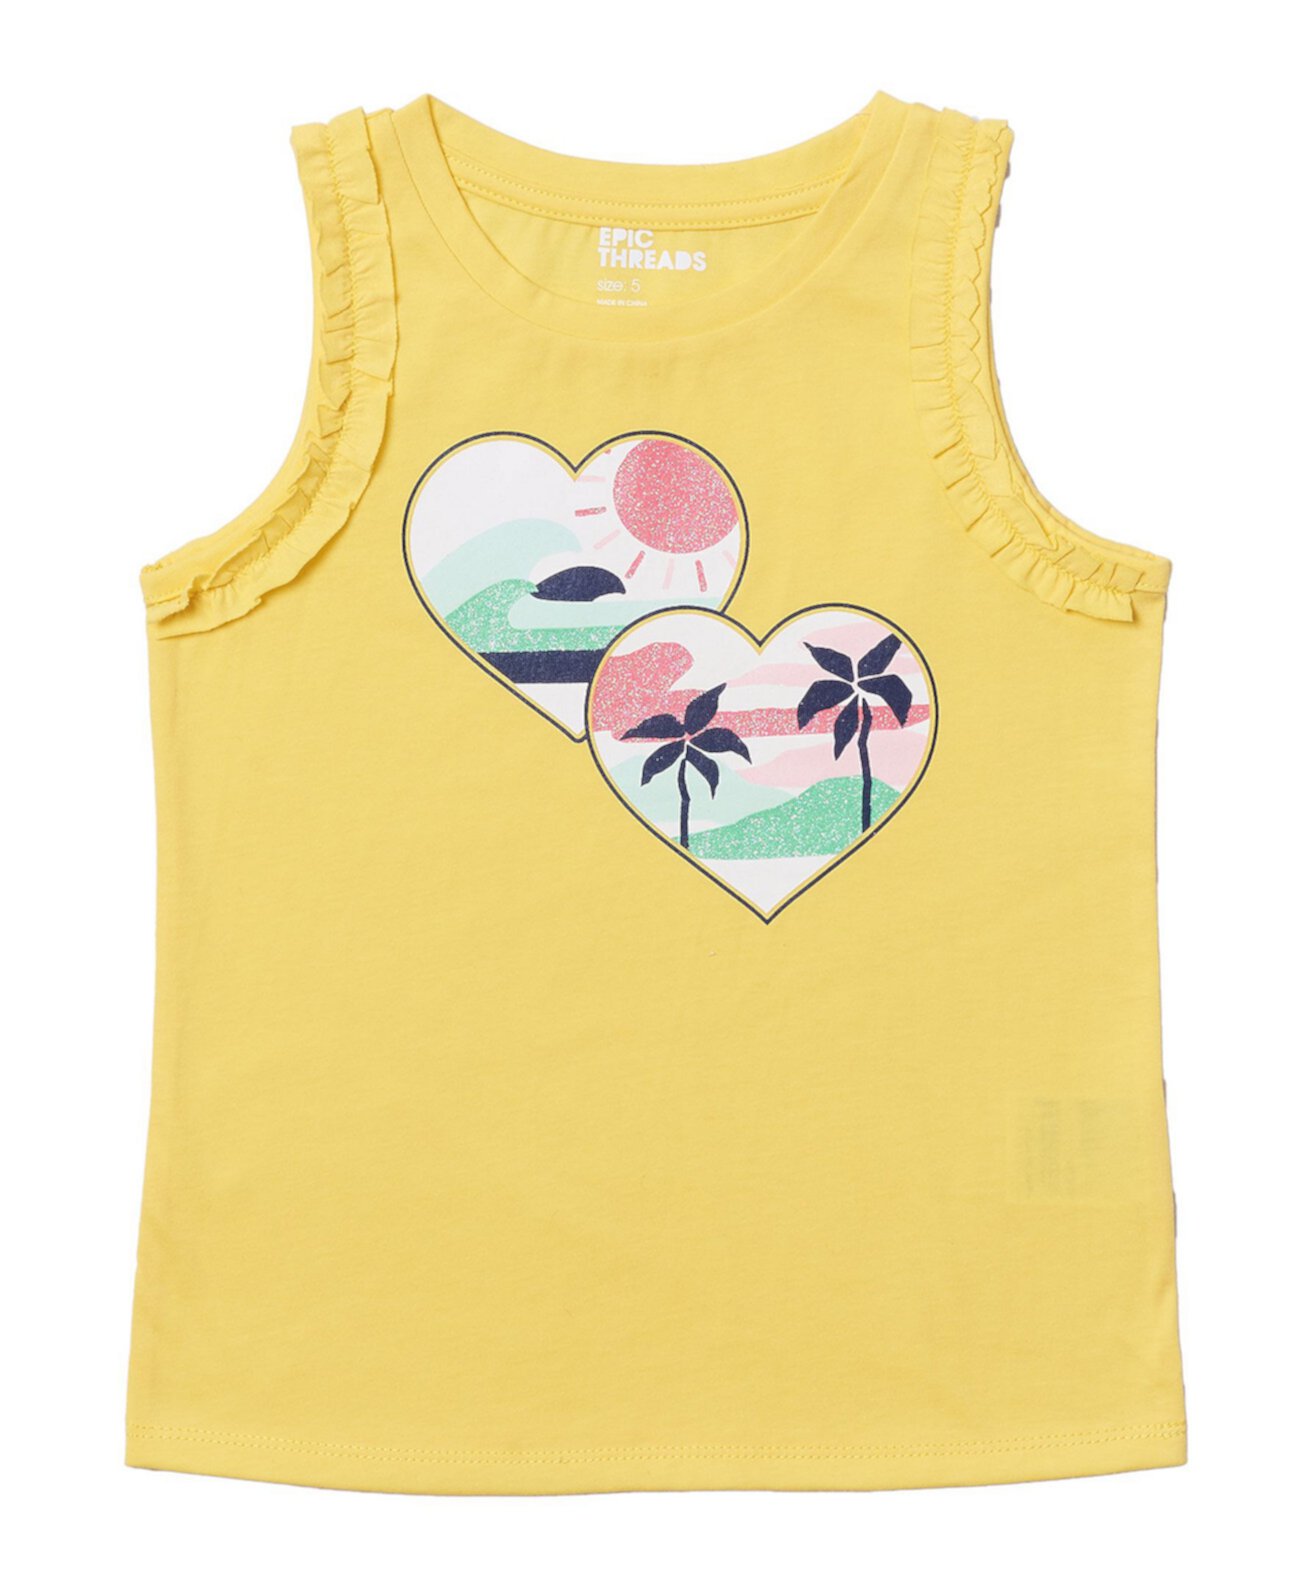 Little Girls Graphic Tank Top Epic Threads